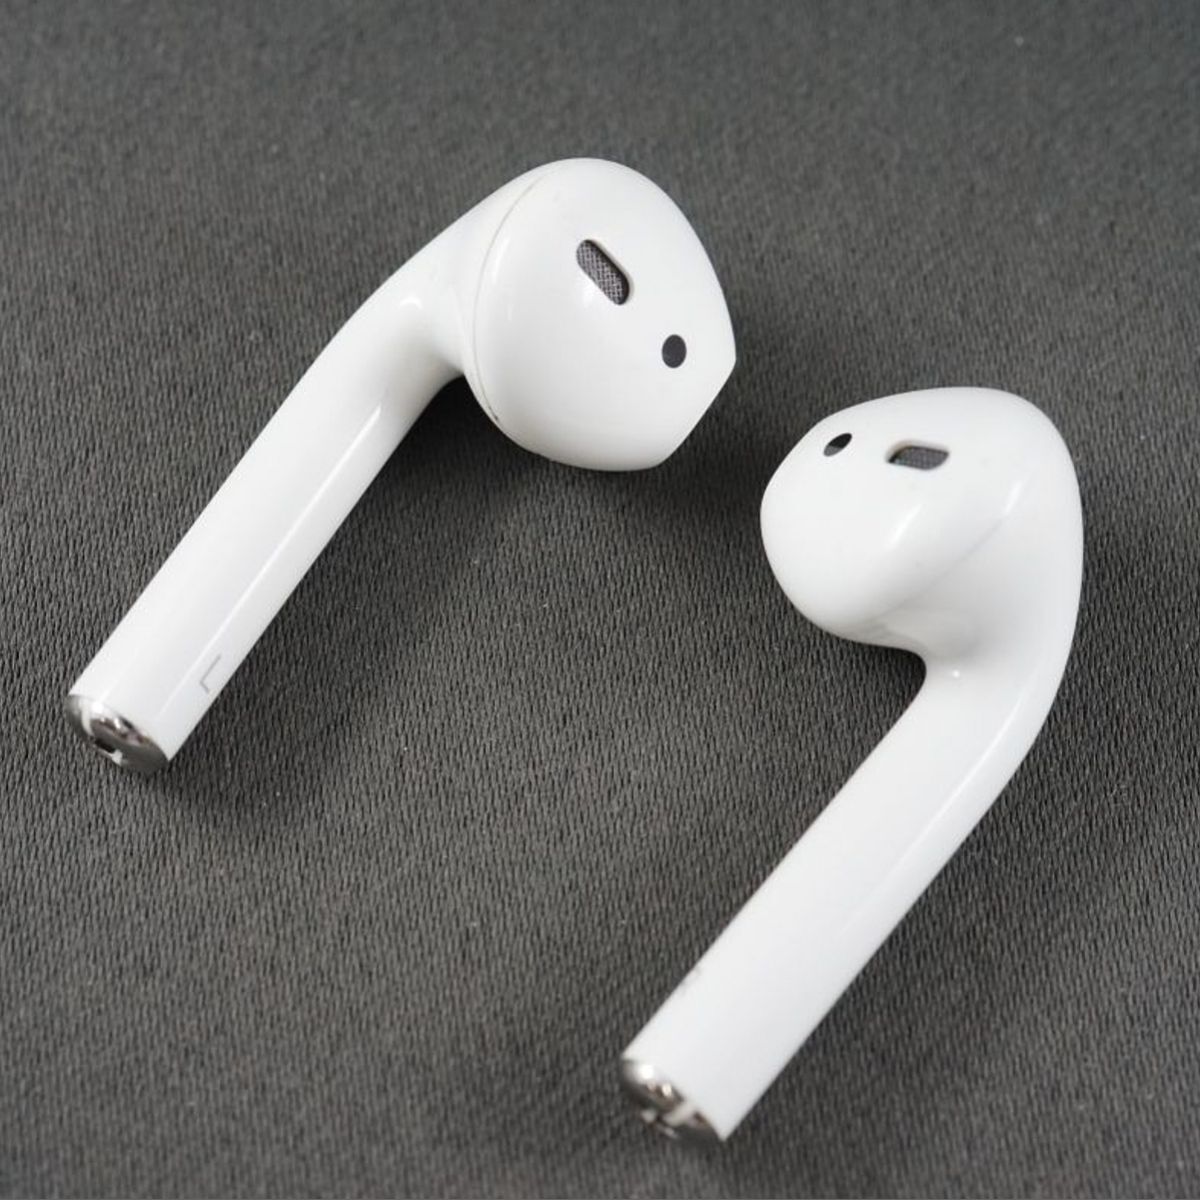 Apple AirPods with Wireless Charging Case エアーポッズ イヤホン USED美品 第二世代 MRXJ2J/A 完動品 中古 V9657_画像4